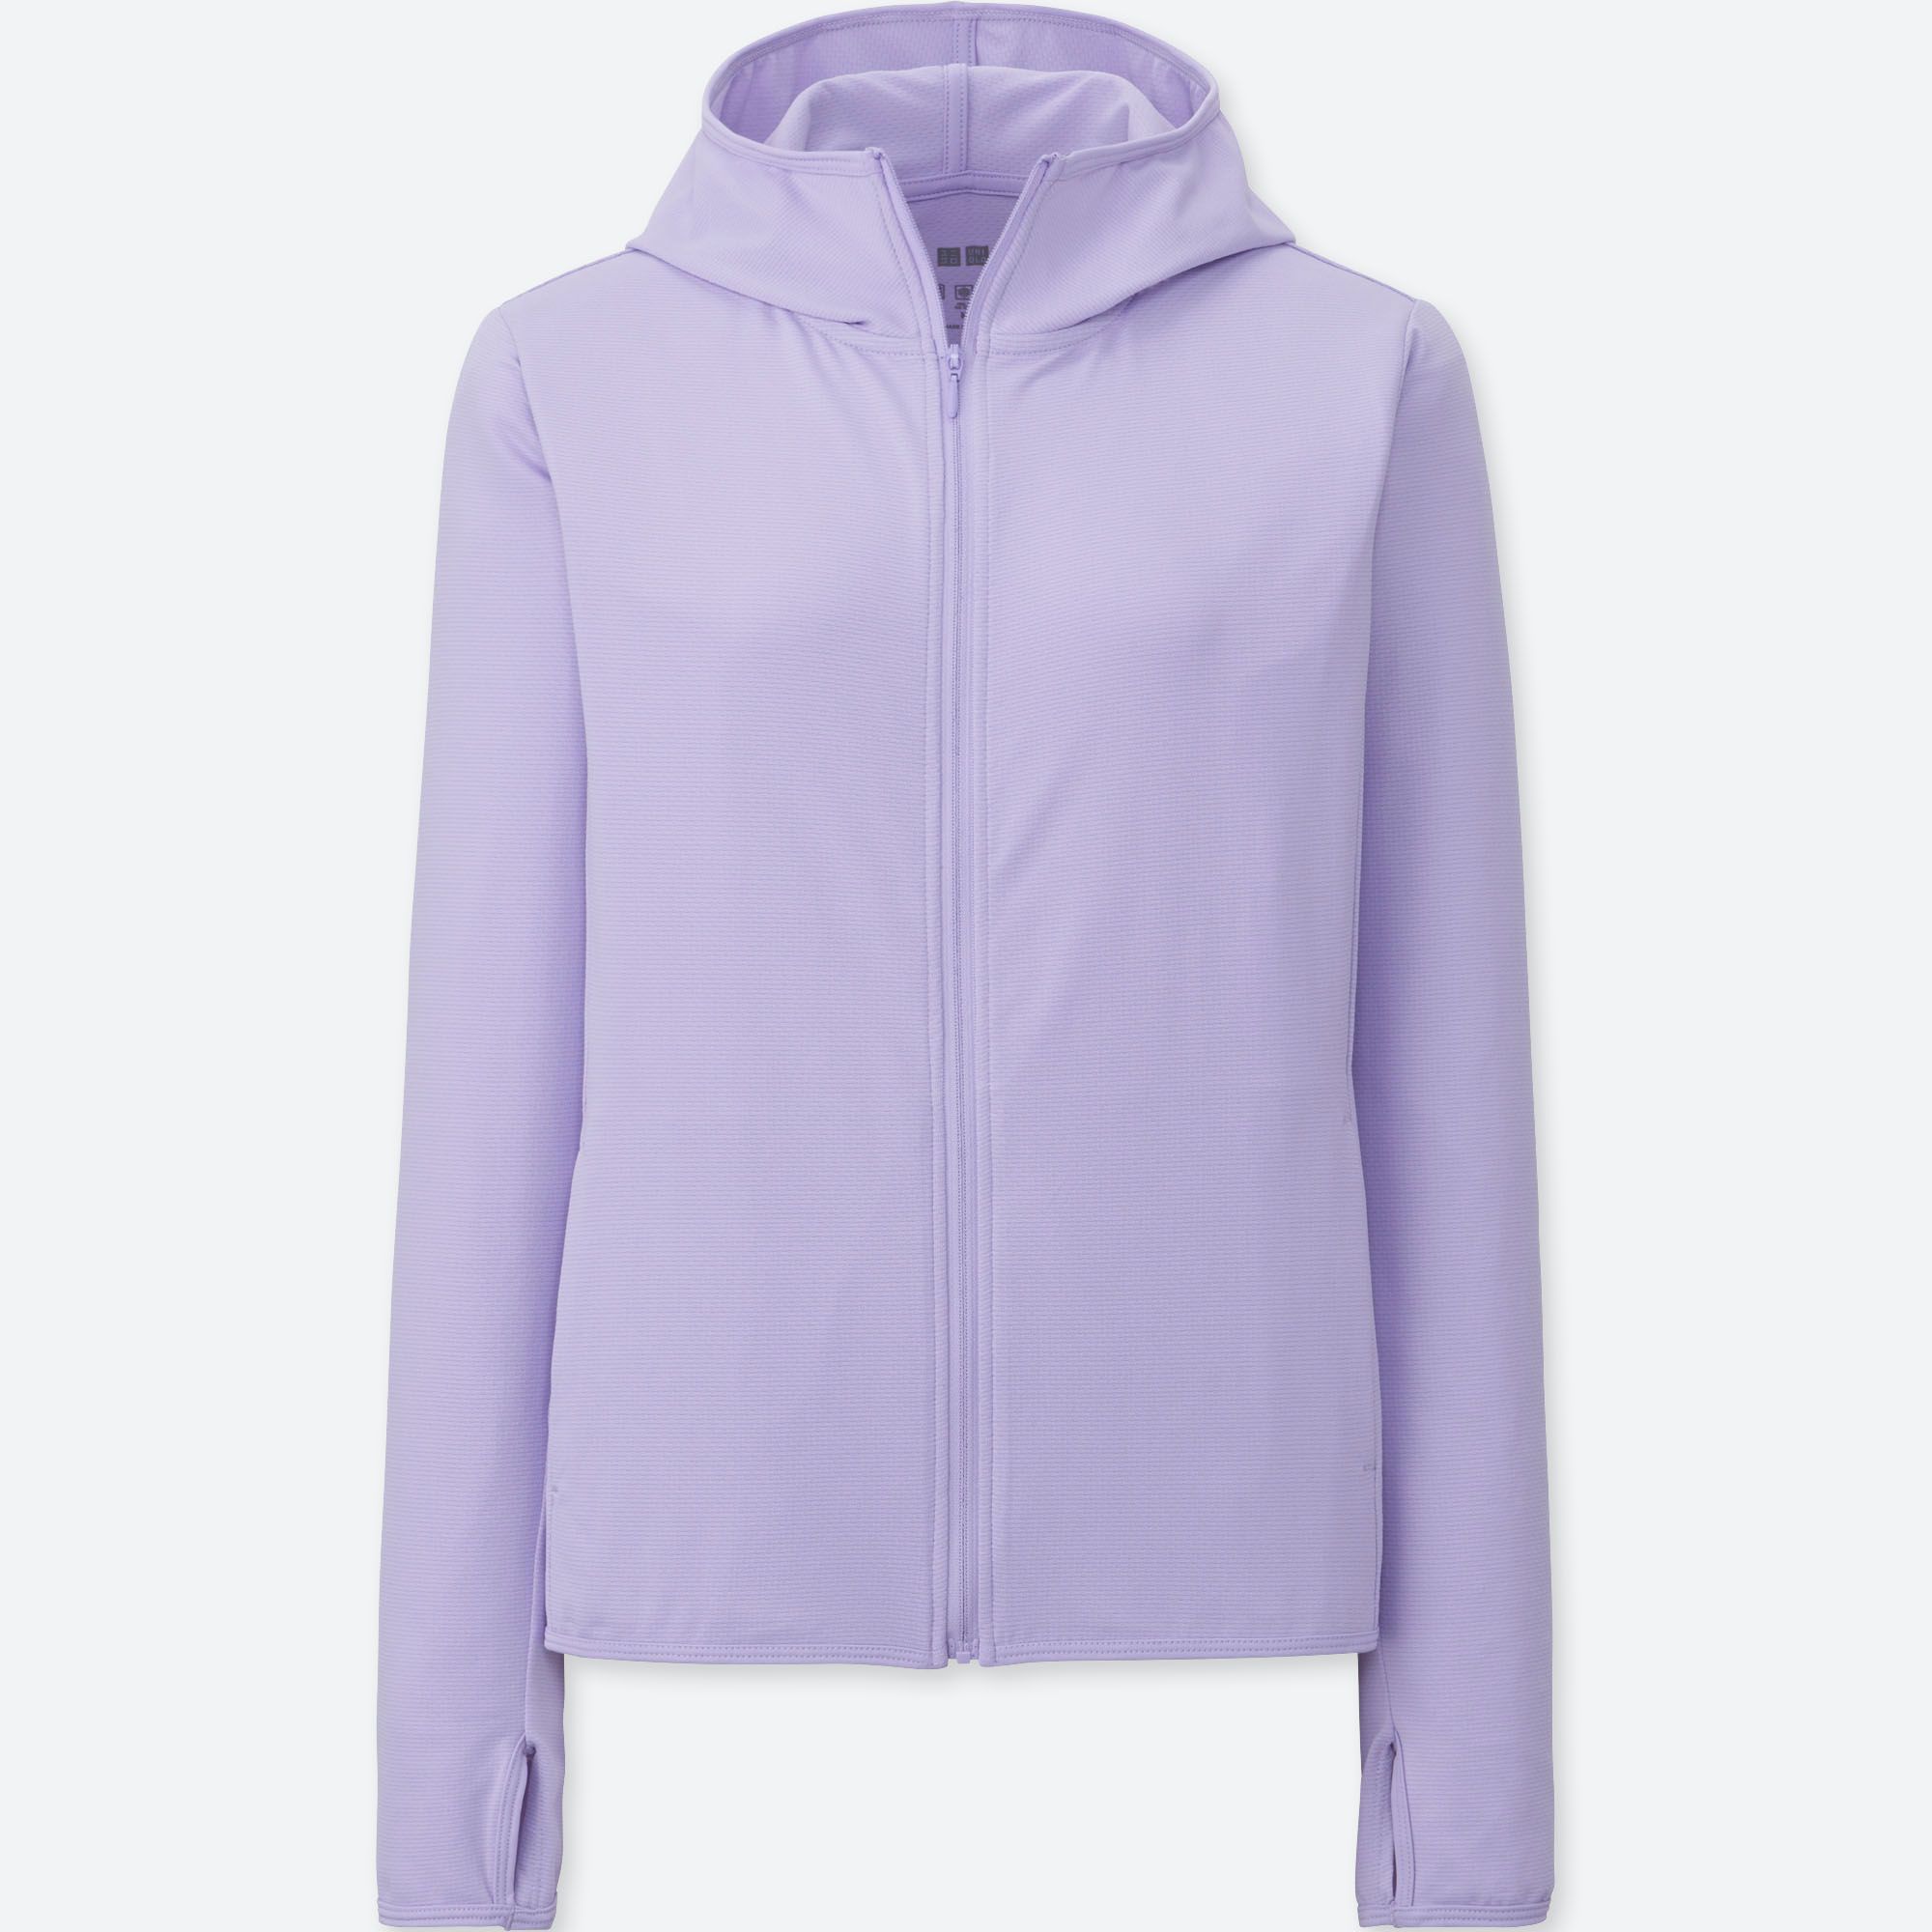 Airism long sleeve uniqlo clothes women trends london